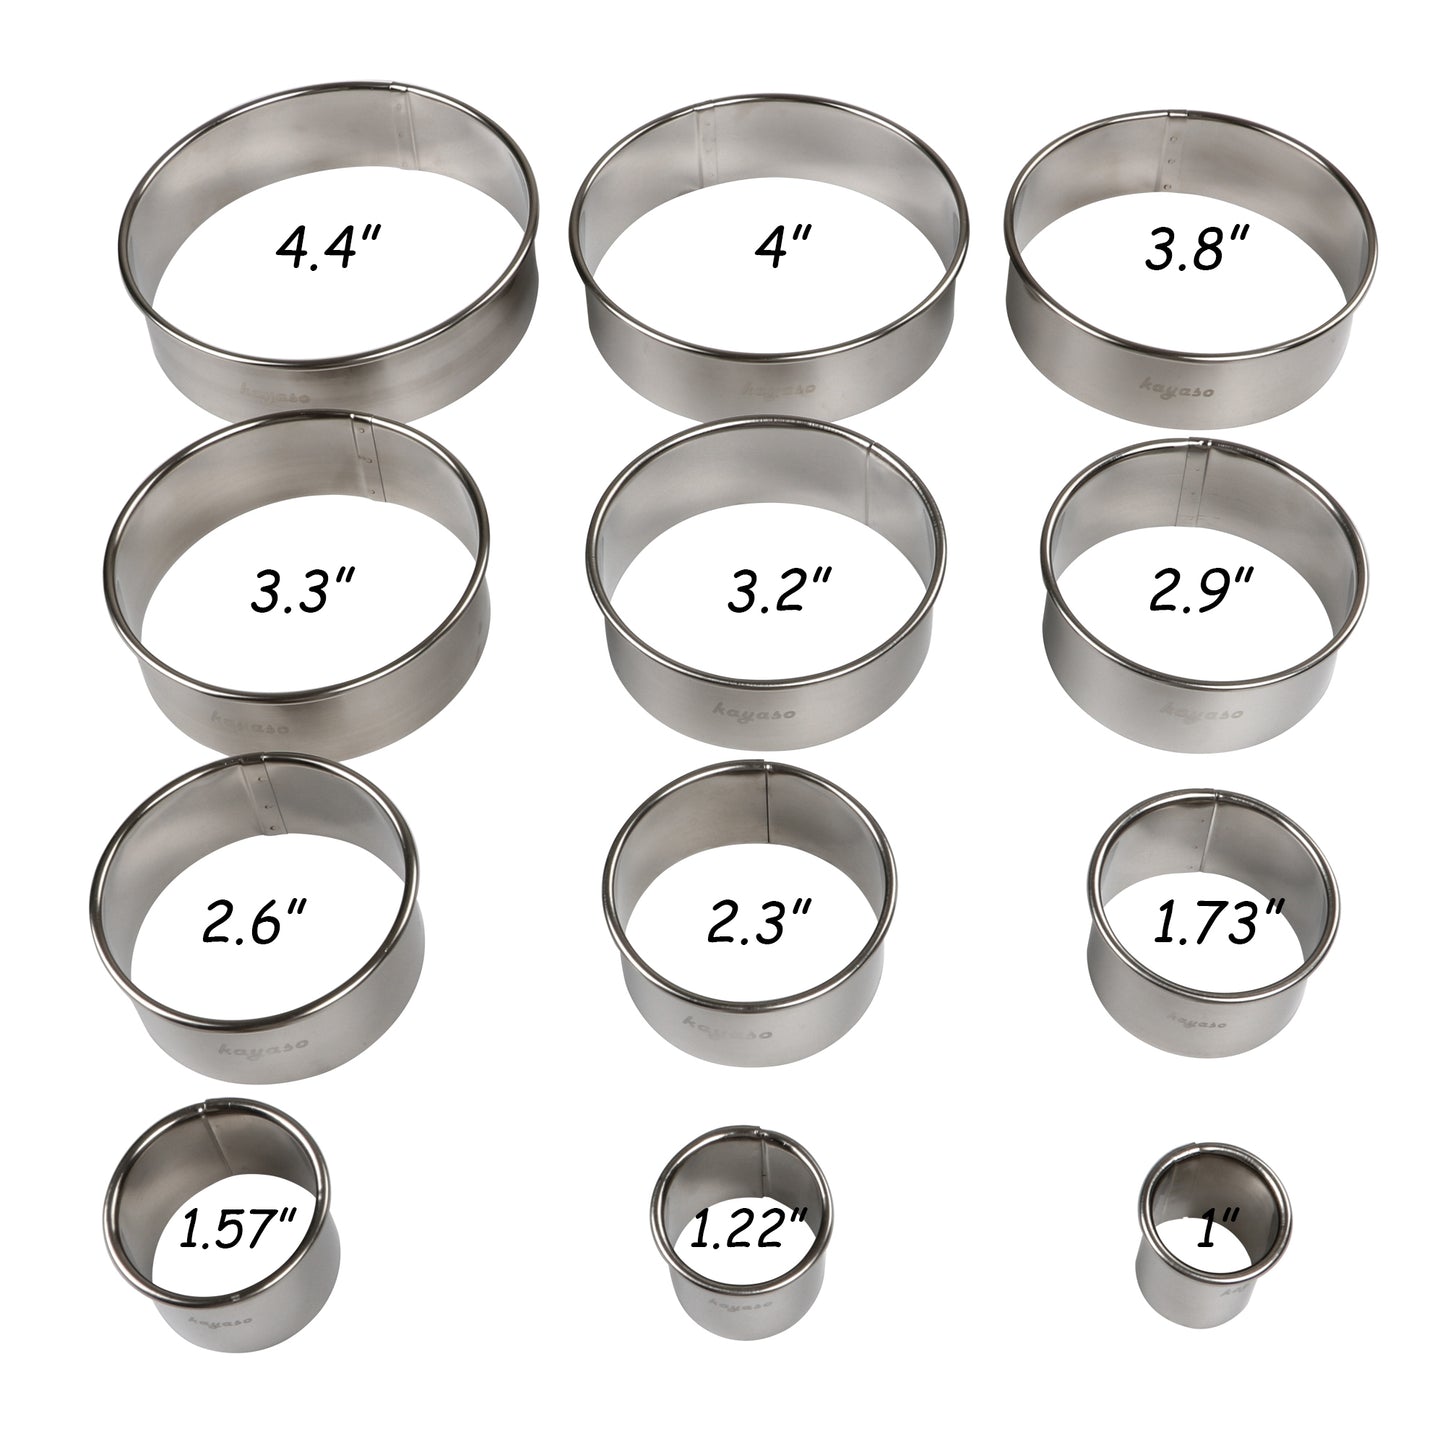 Kayaso Round Cutters in Graduated Sizes, Stainless Steel, 12 Pc Set (Plain Edge)